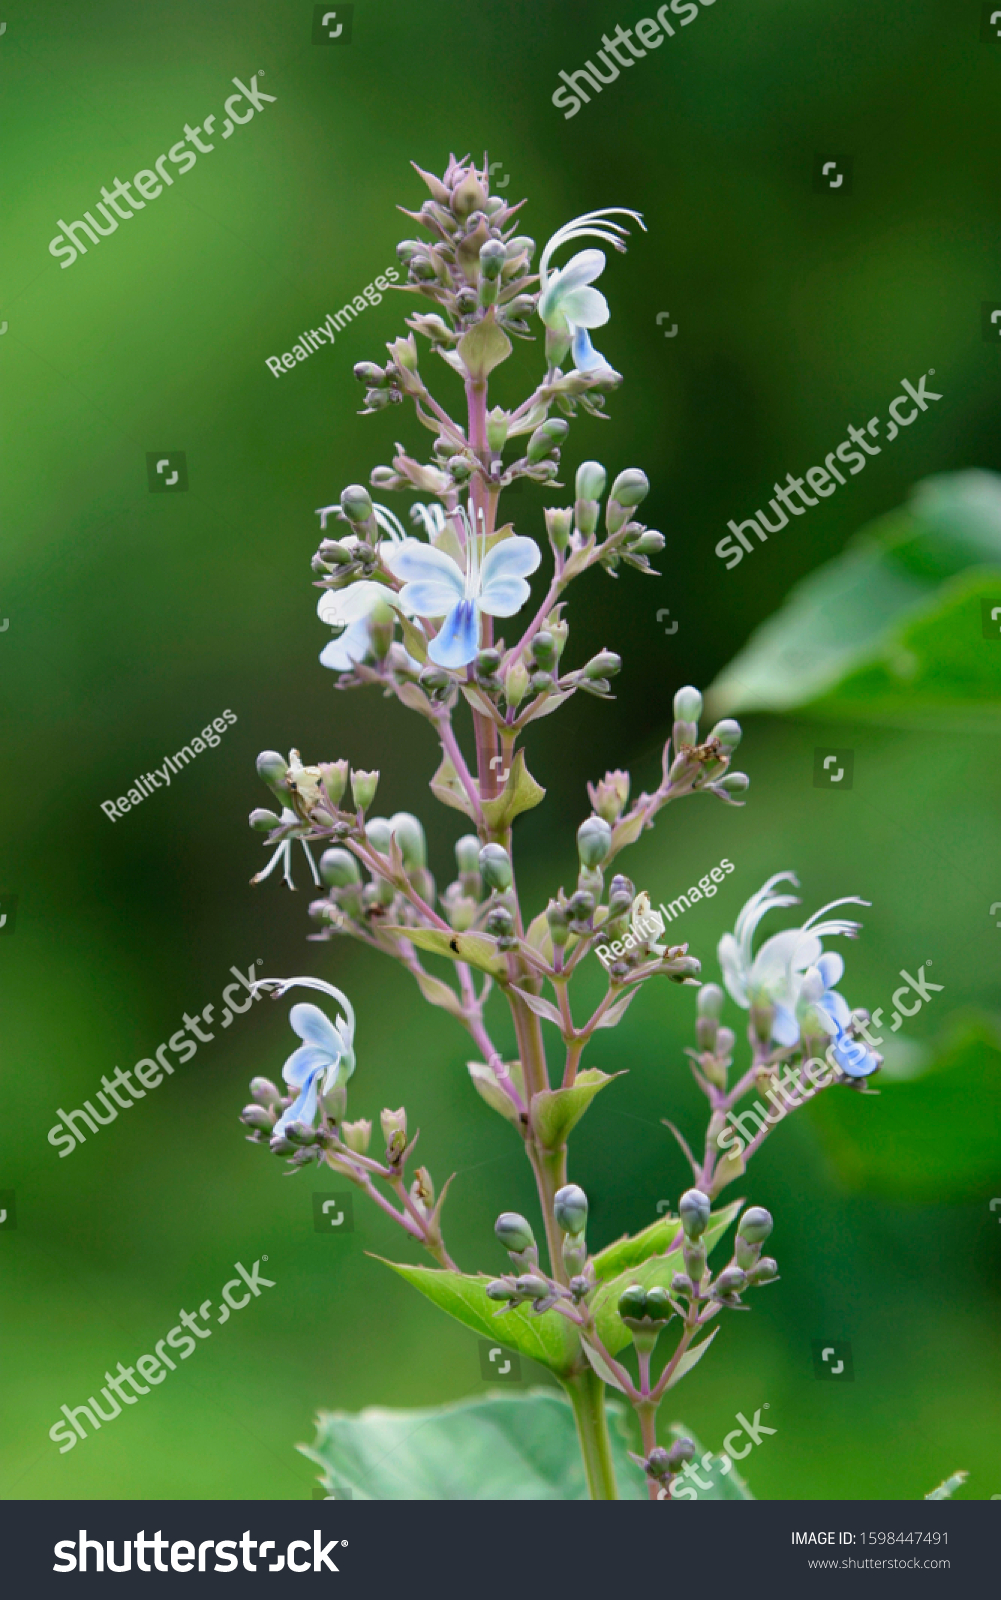 Clerodendrum serratum - Wild flowers found during monsoon in Western Ghats of India #1598447491